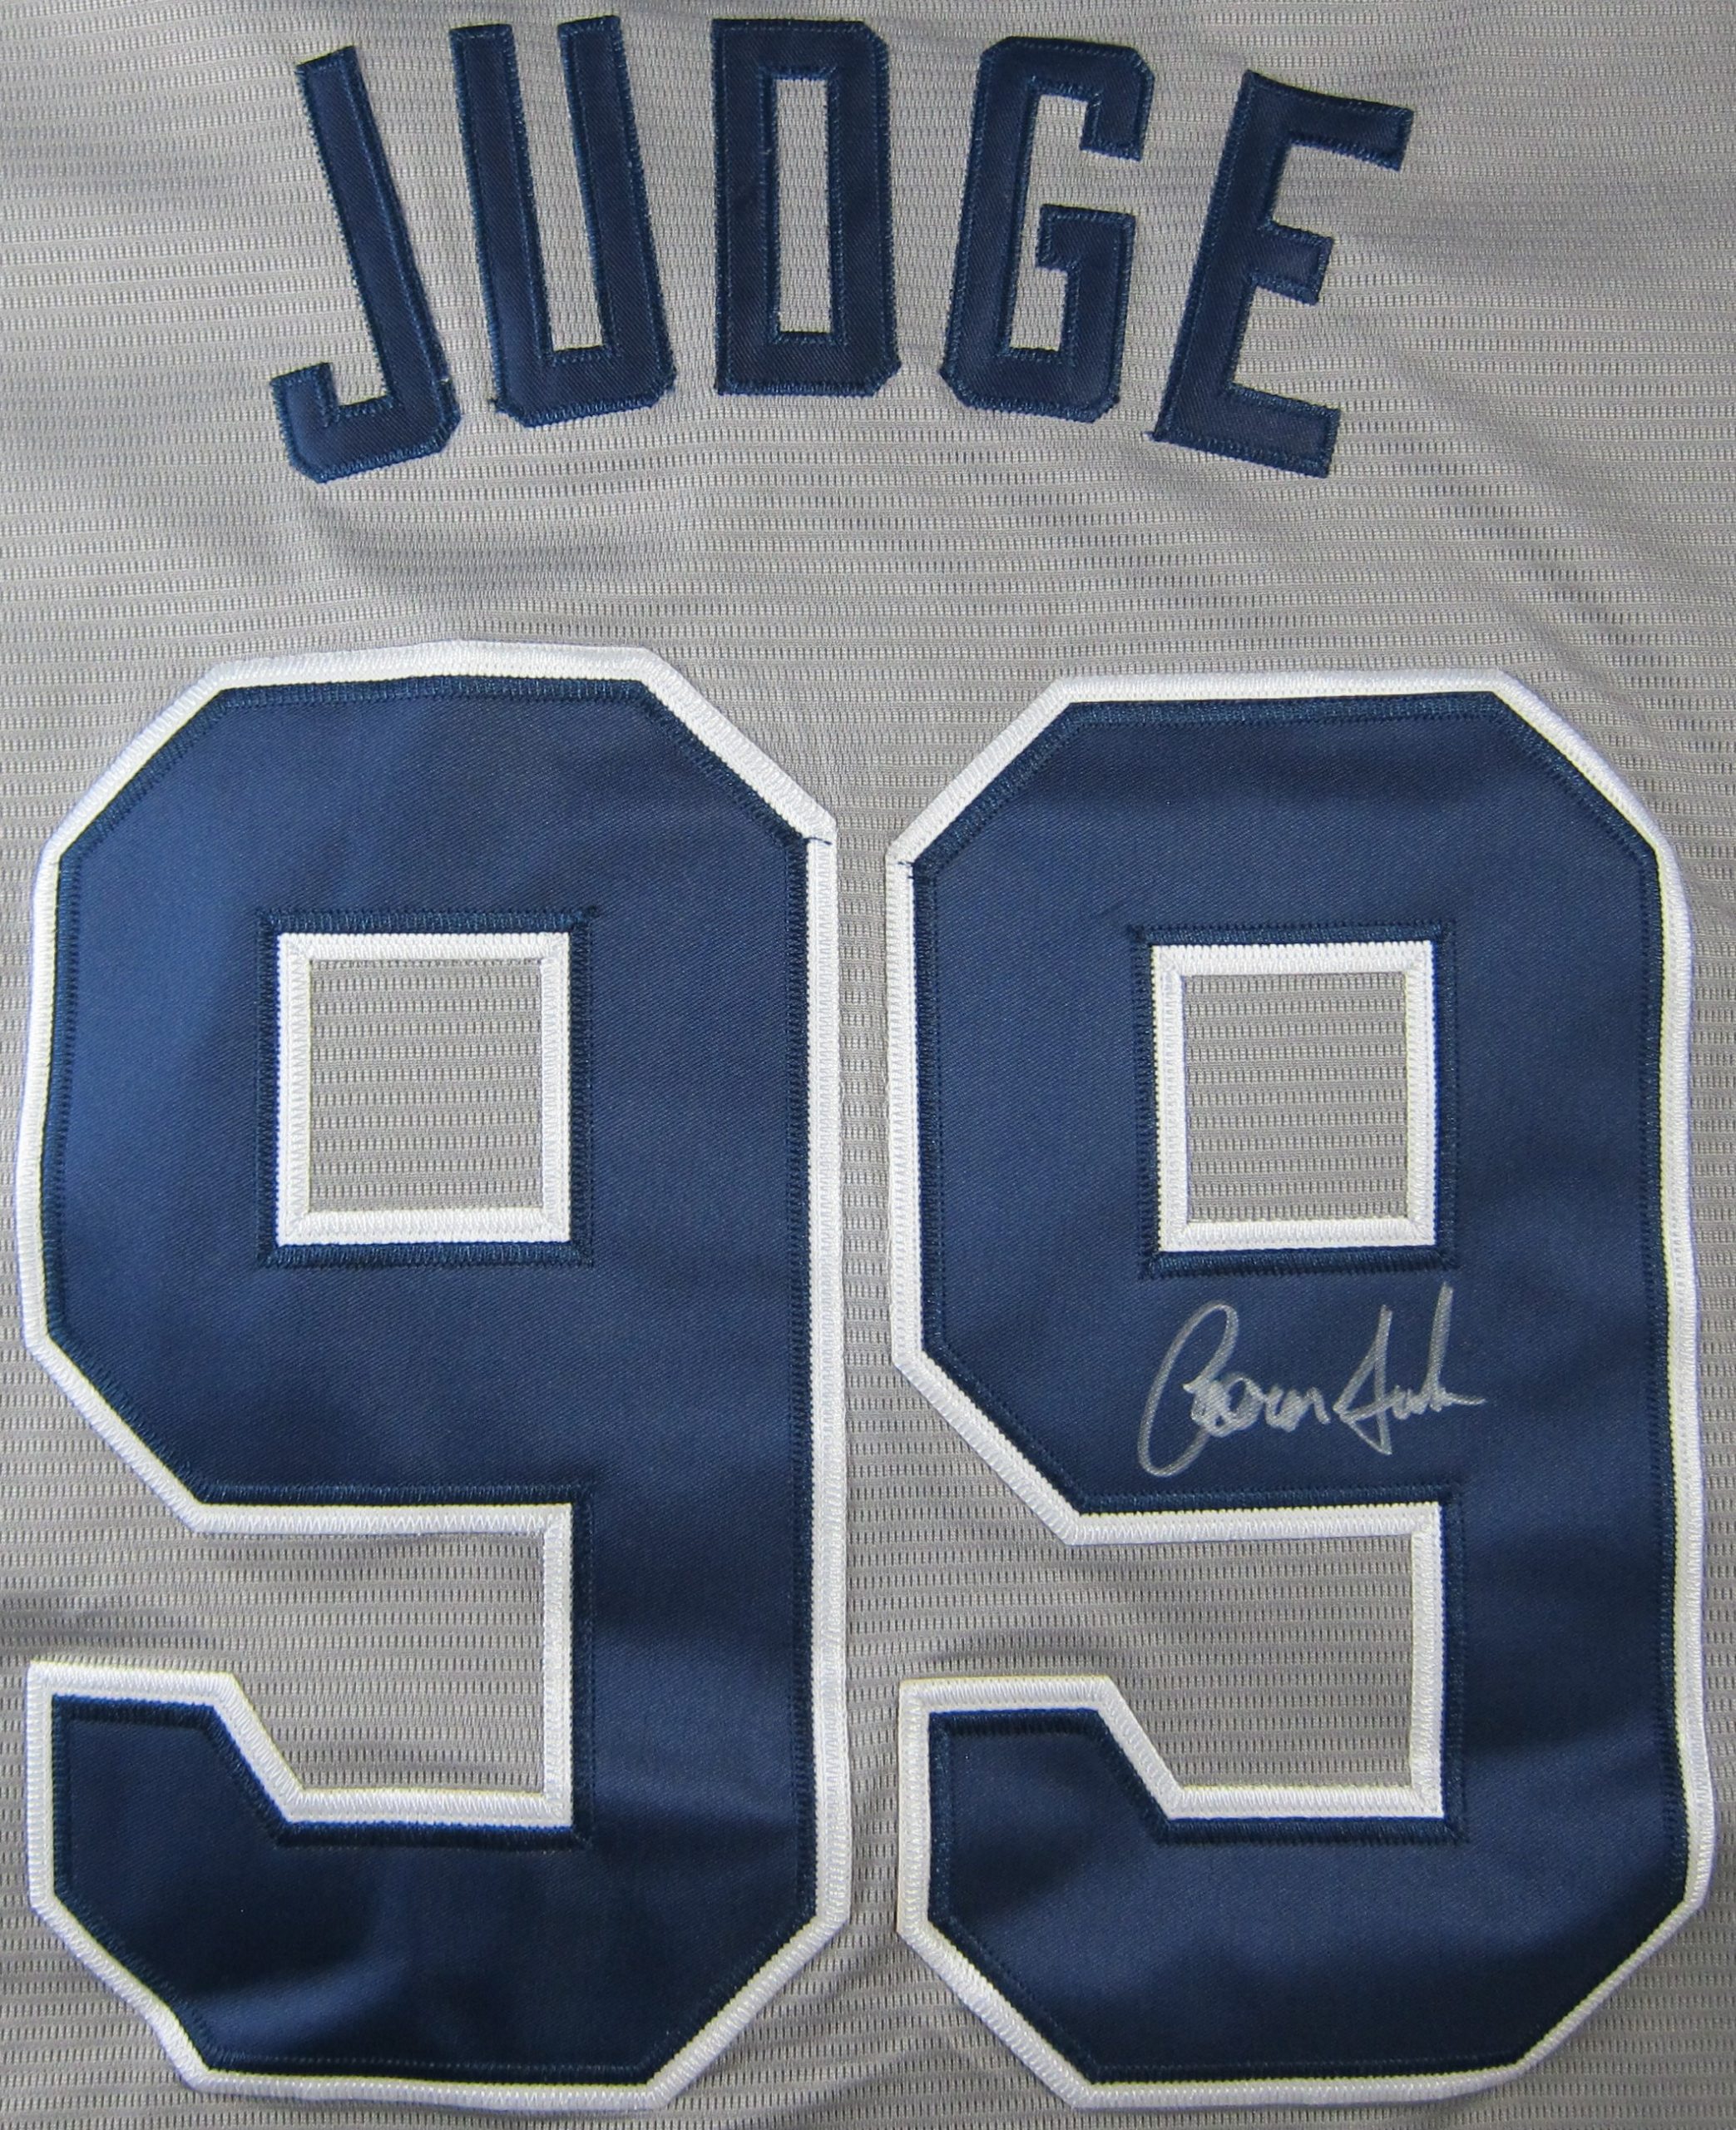 judge signed jersey